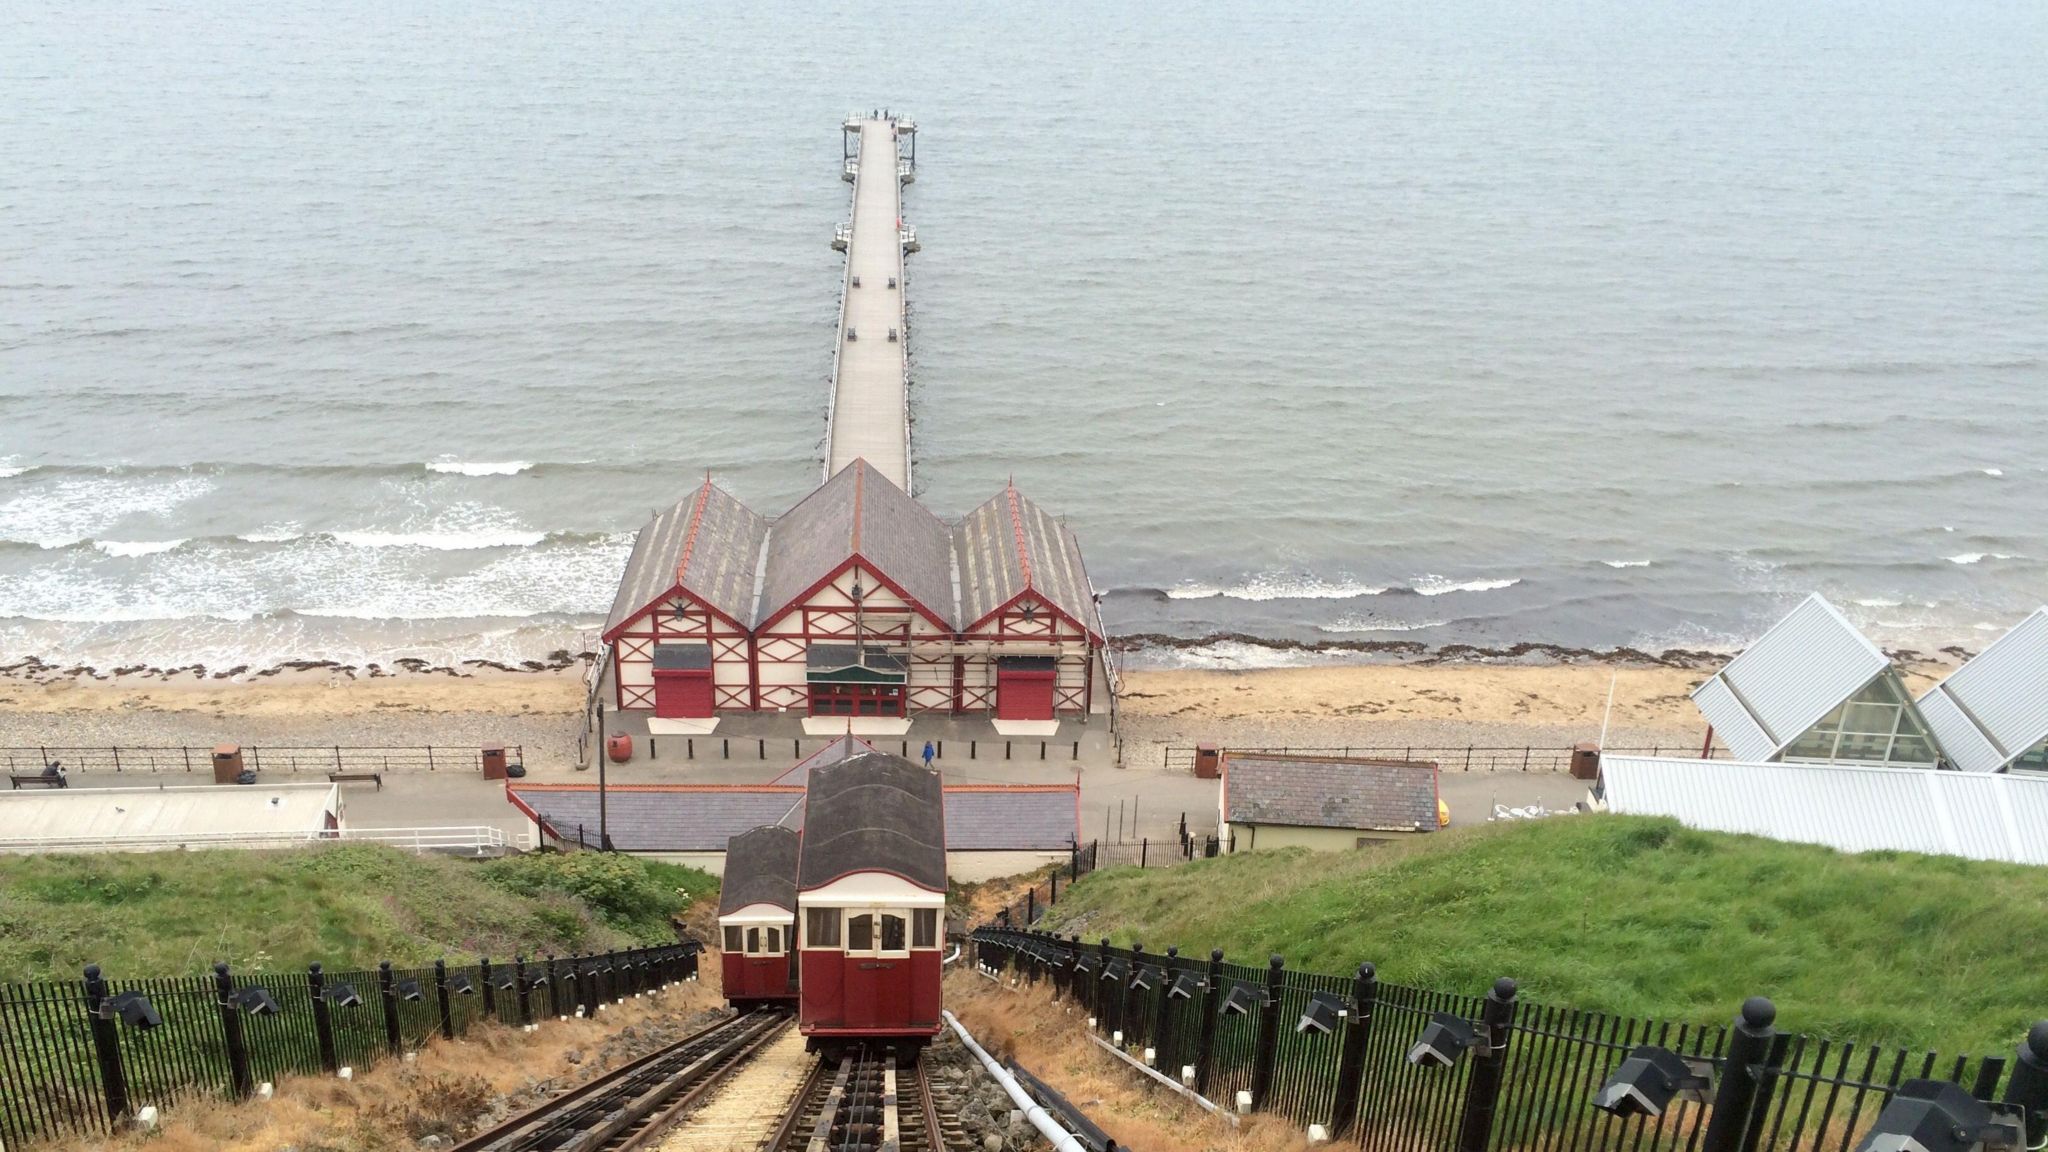 Saltburn's cliff lift is by the pier